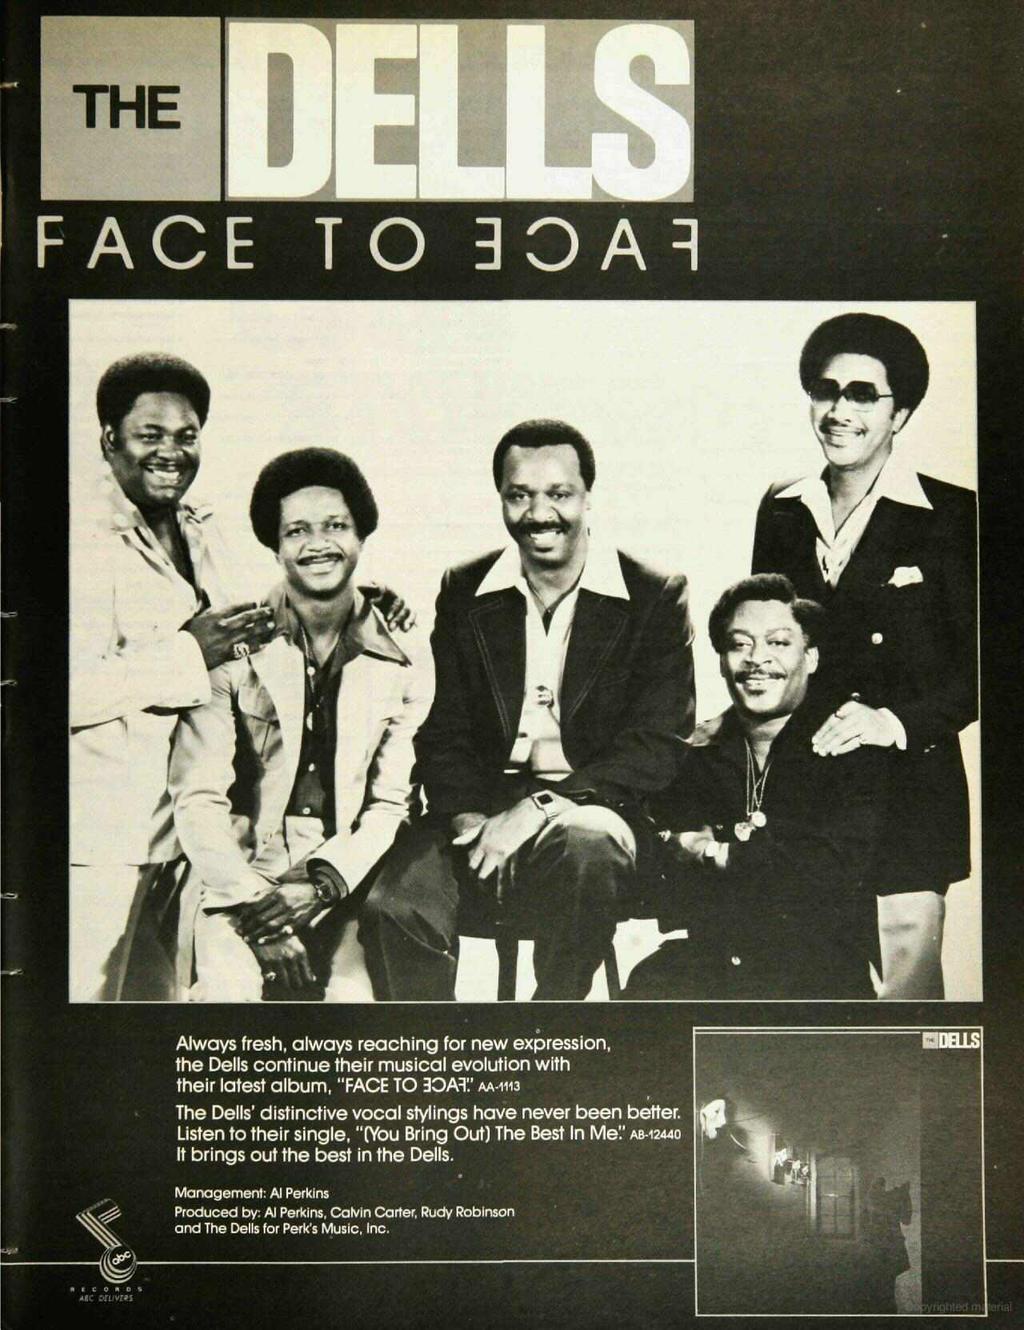 THE i FACE TO ROAR Always fresh, always reaching for new expression, the Dells continue their musical evolution with their latest album, "FACE TO ROAR:' M-1113 The Dells' distinctive vocal stylings